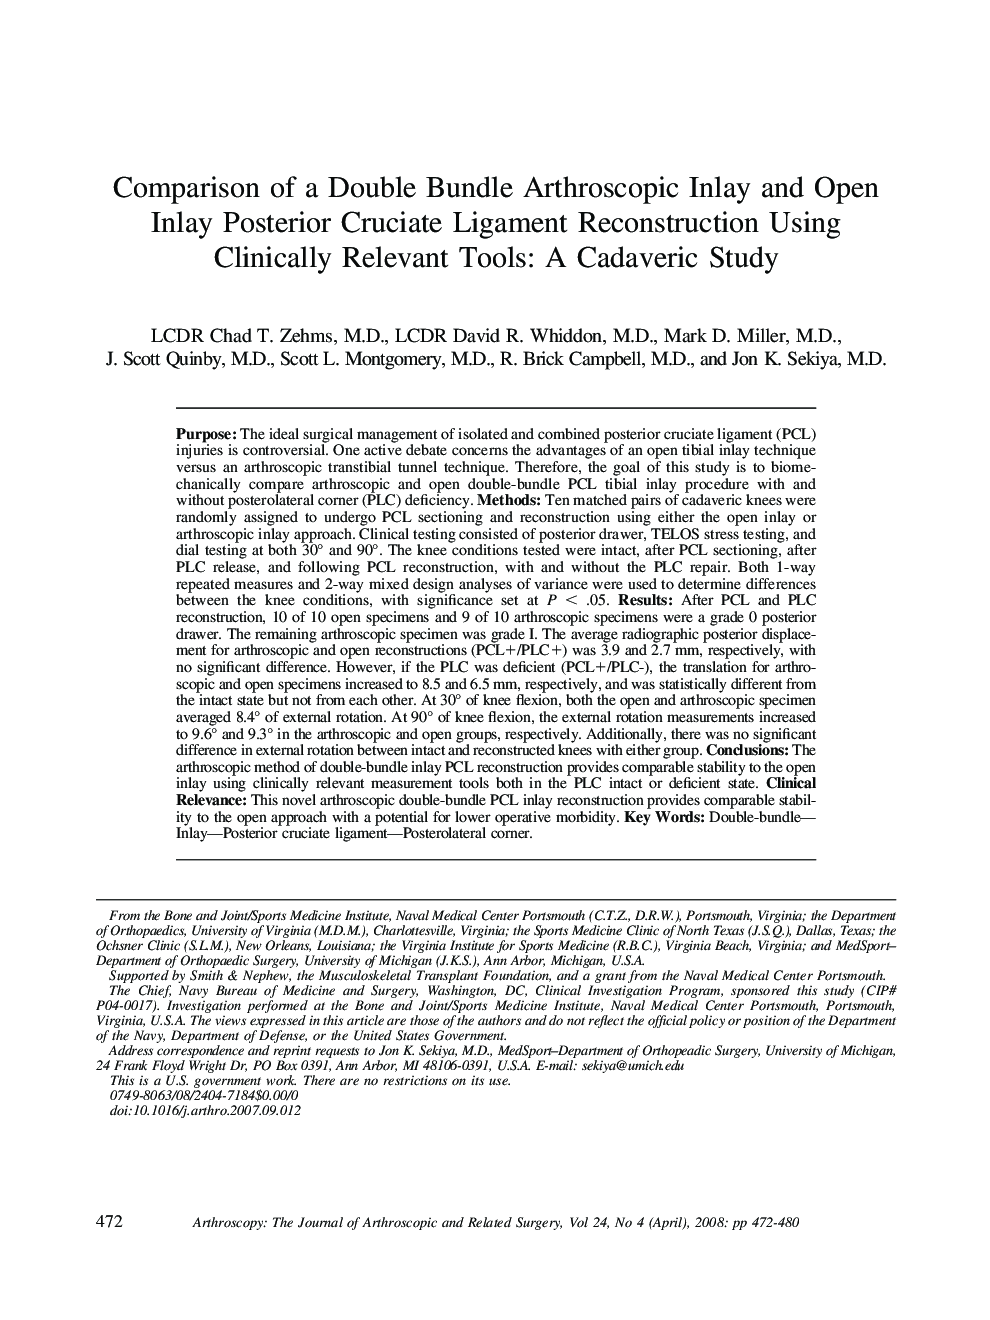 Comparison of a Double Bundle Arthroscopic Inlay and Open Inlay Posterior Cruciate Ligament Reconstruction Using Clinically Relevant Tools: A Cadaveric Study 